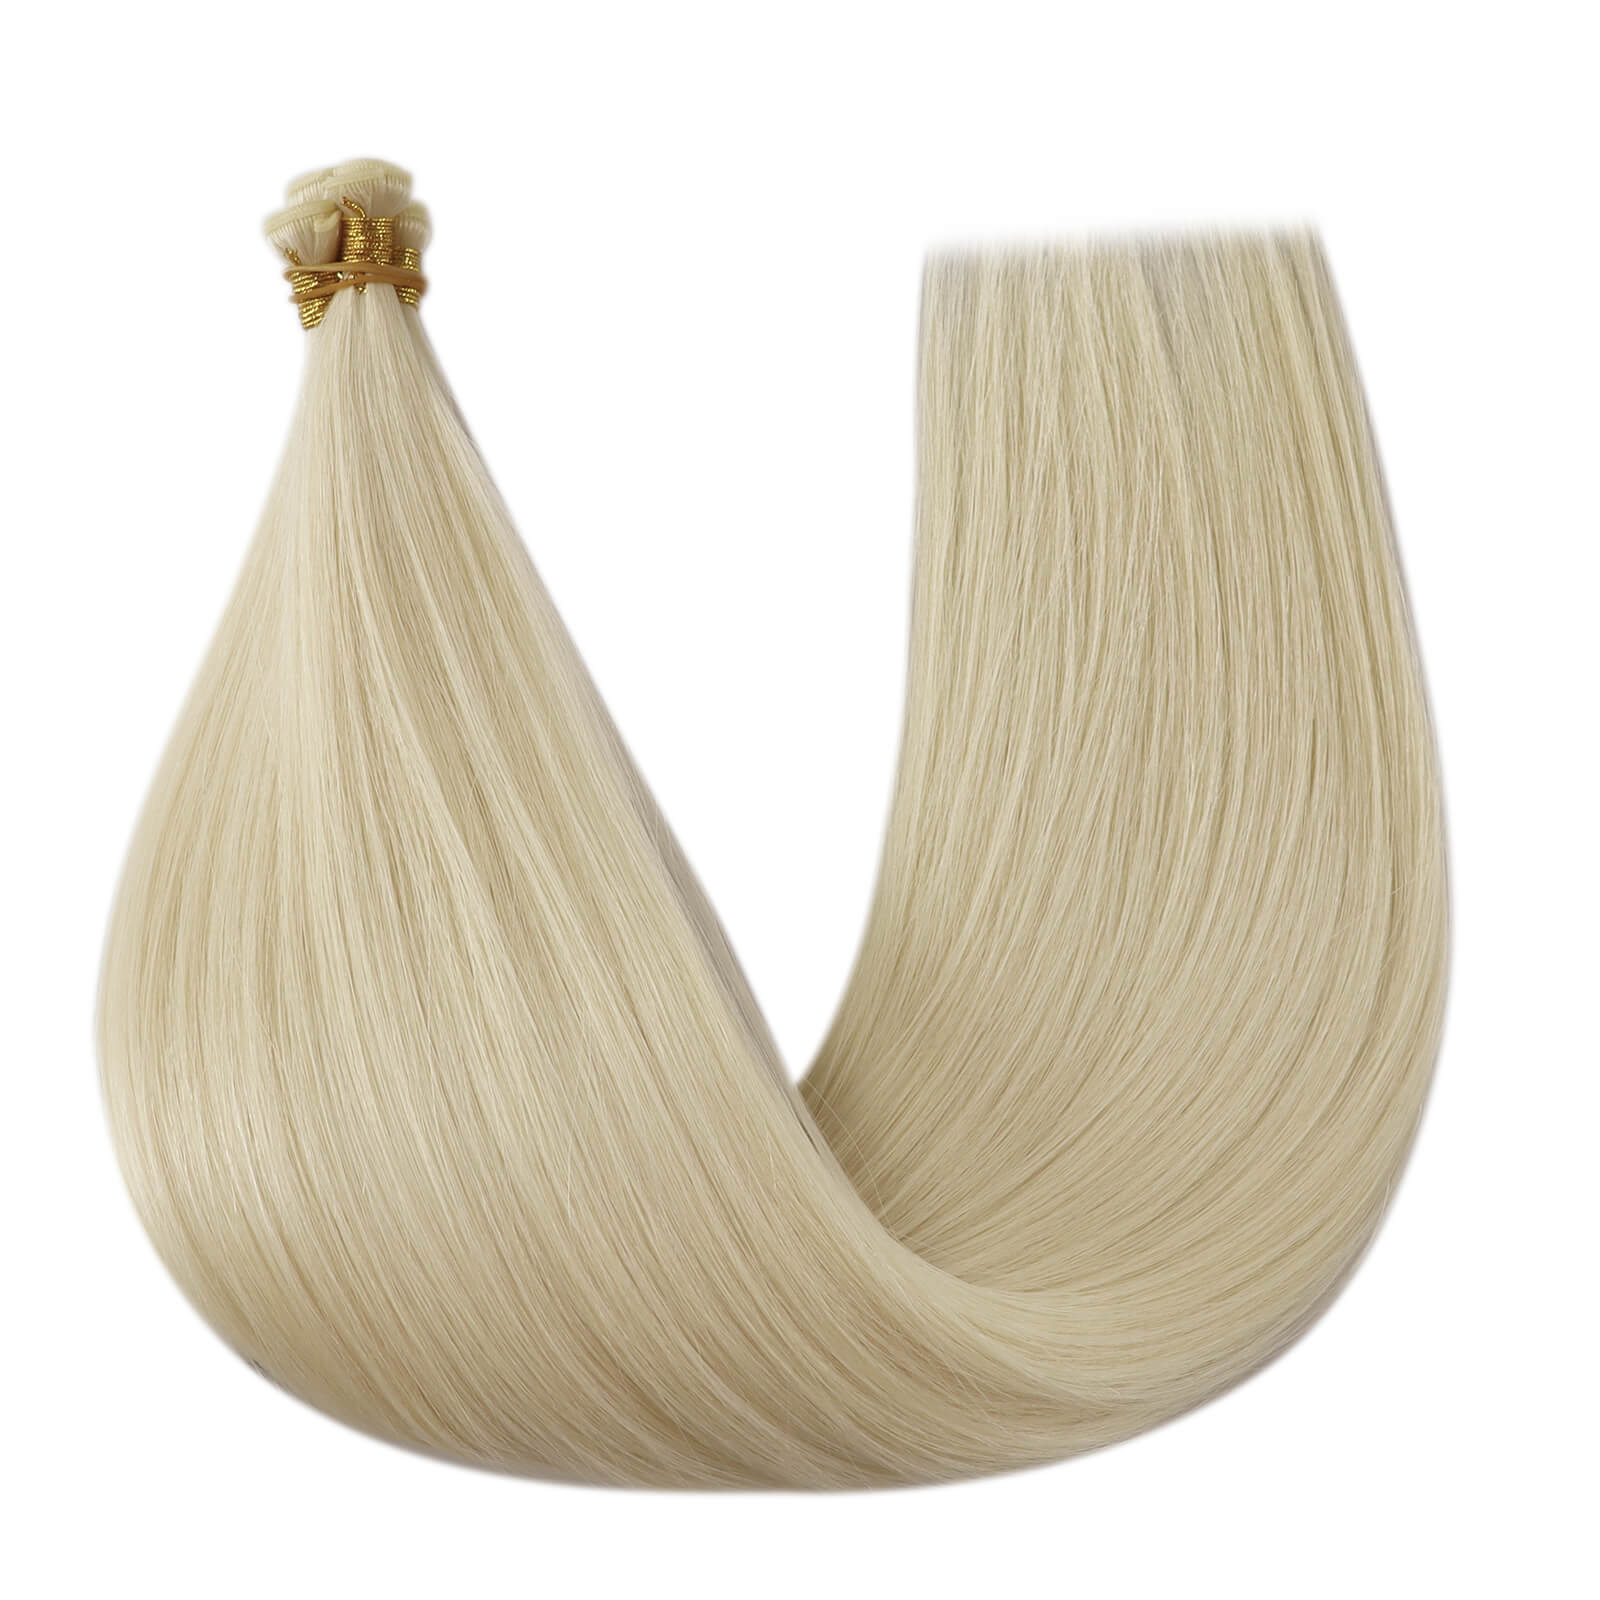 genius weft real human hair extensions whitest blonde